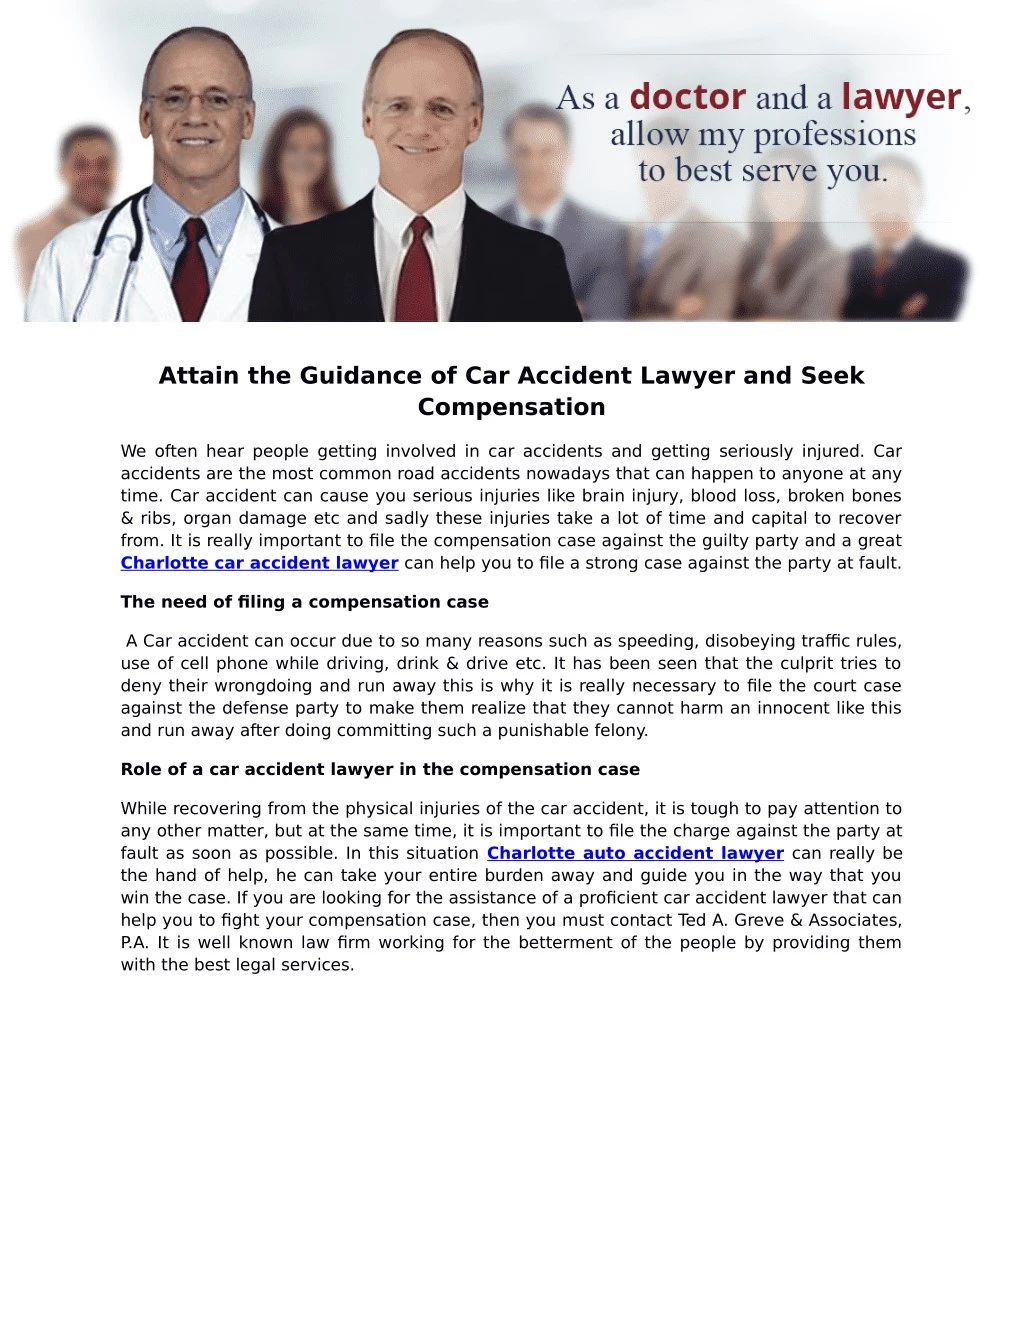 attain the guidance of car accident lawyer